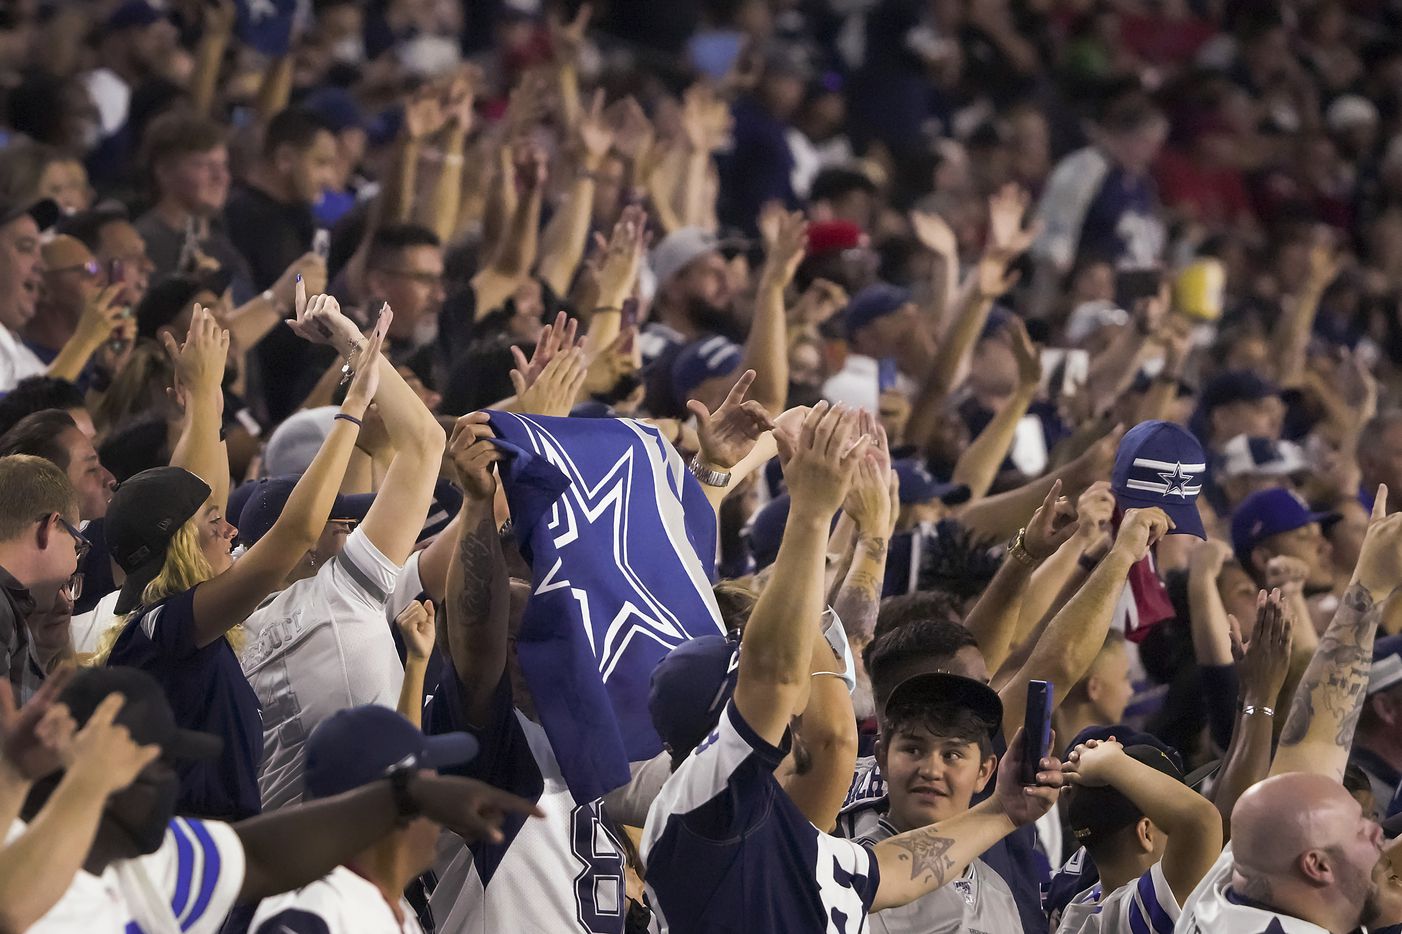 Dallas Cowboys fans cheer their team during the second half of a preseason NFL football game against the Arizona Cardinals at State Farm Stadium on Friday, Aug. 13, 2021, in Glendale, Ariz.